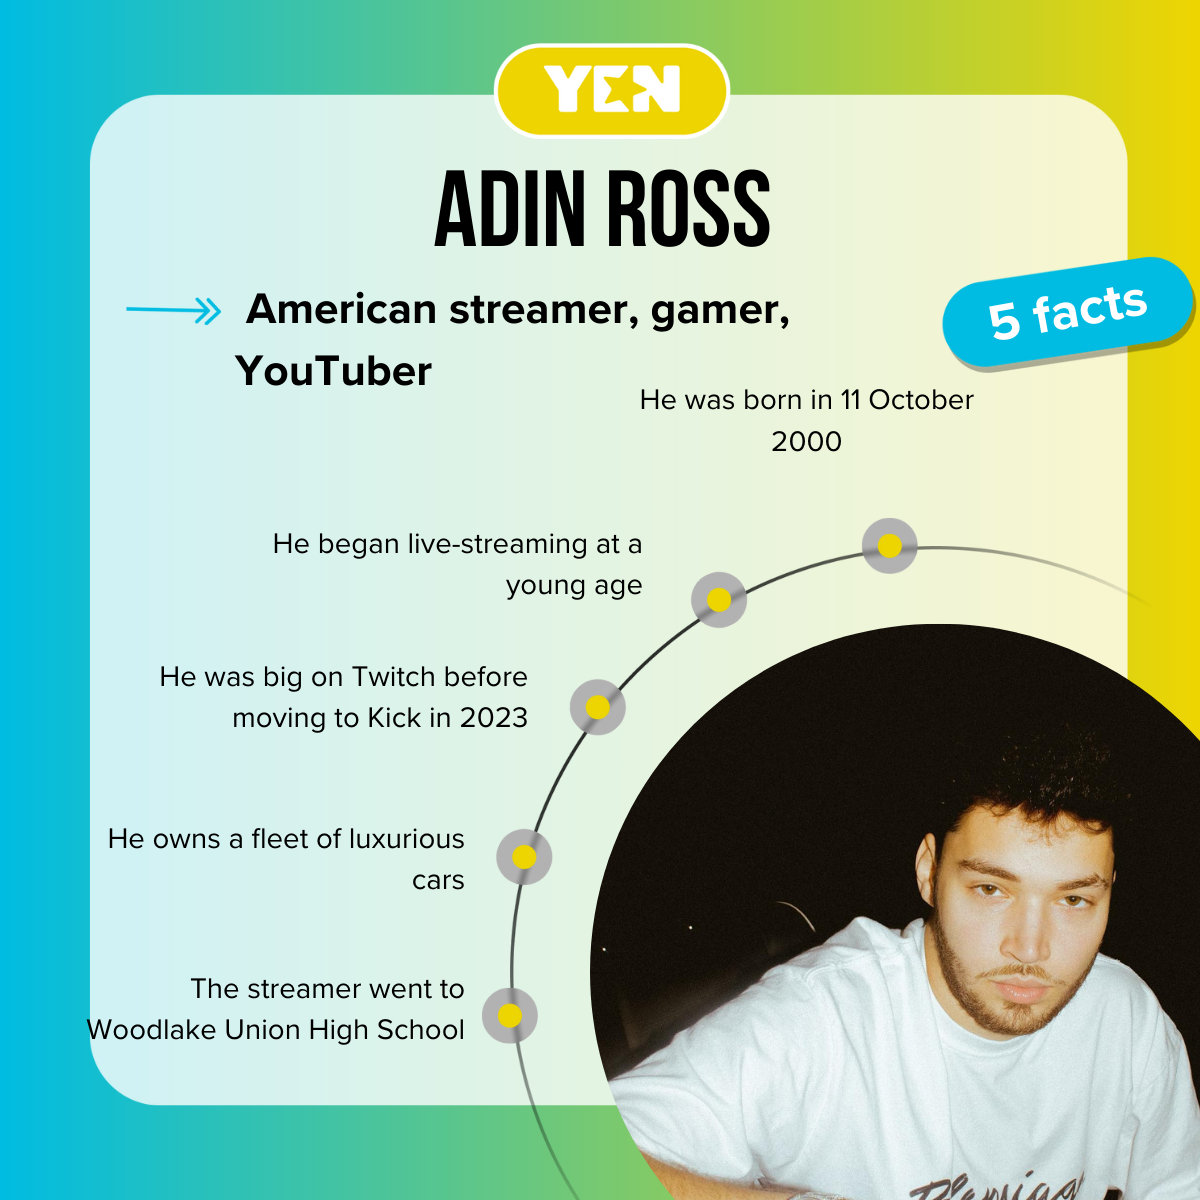 Top 5 facts about Adin Ross